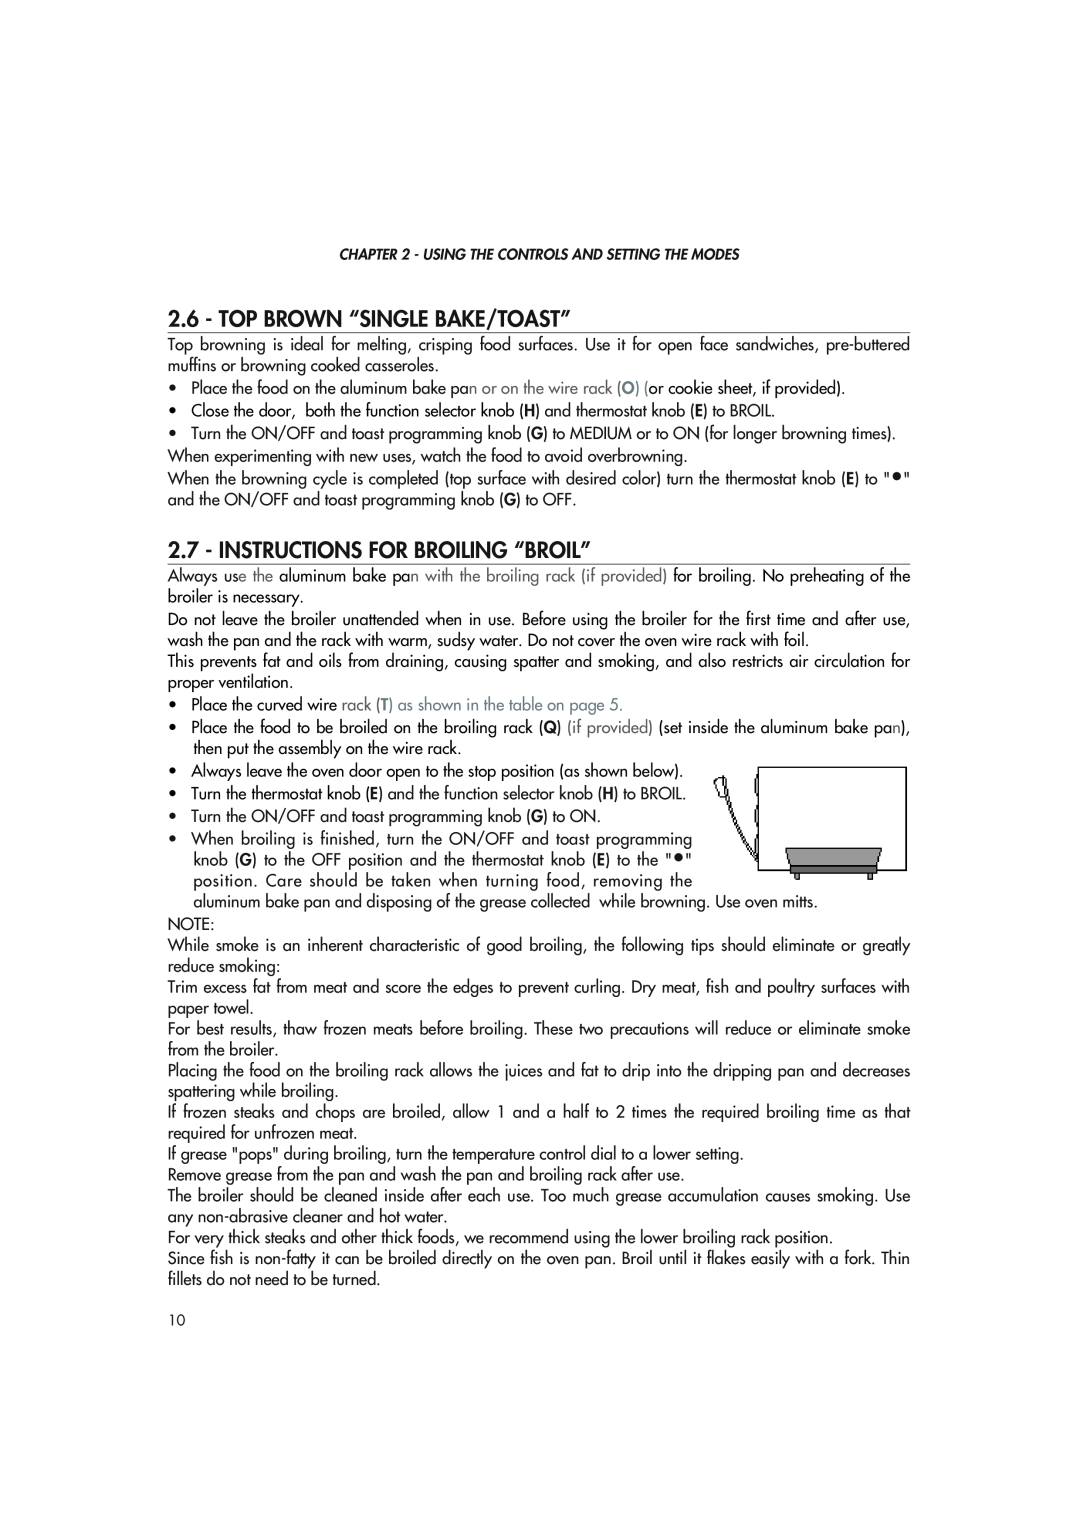 DeLonghi xu1837w manual Top Brown “Single Bake/Toast”, Instructions For Broiling “Broil” 